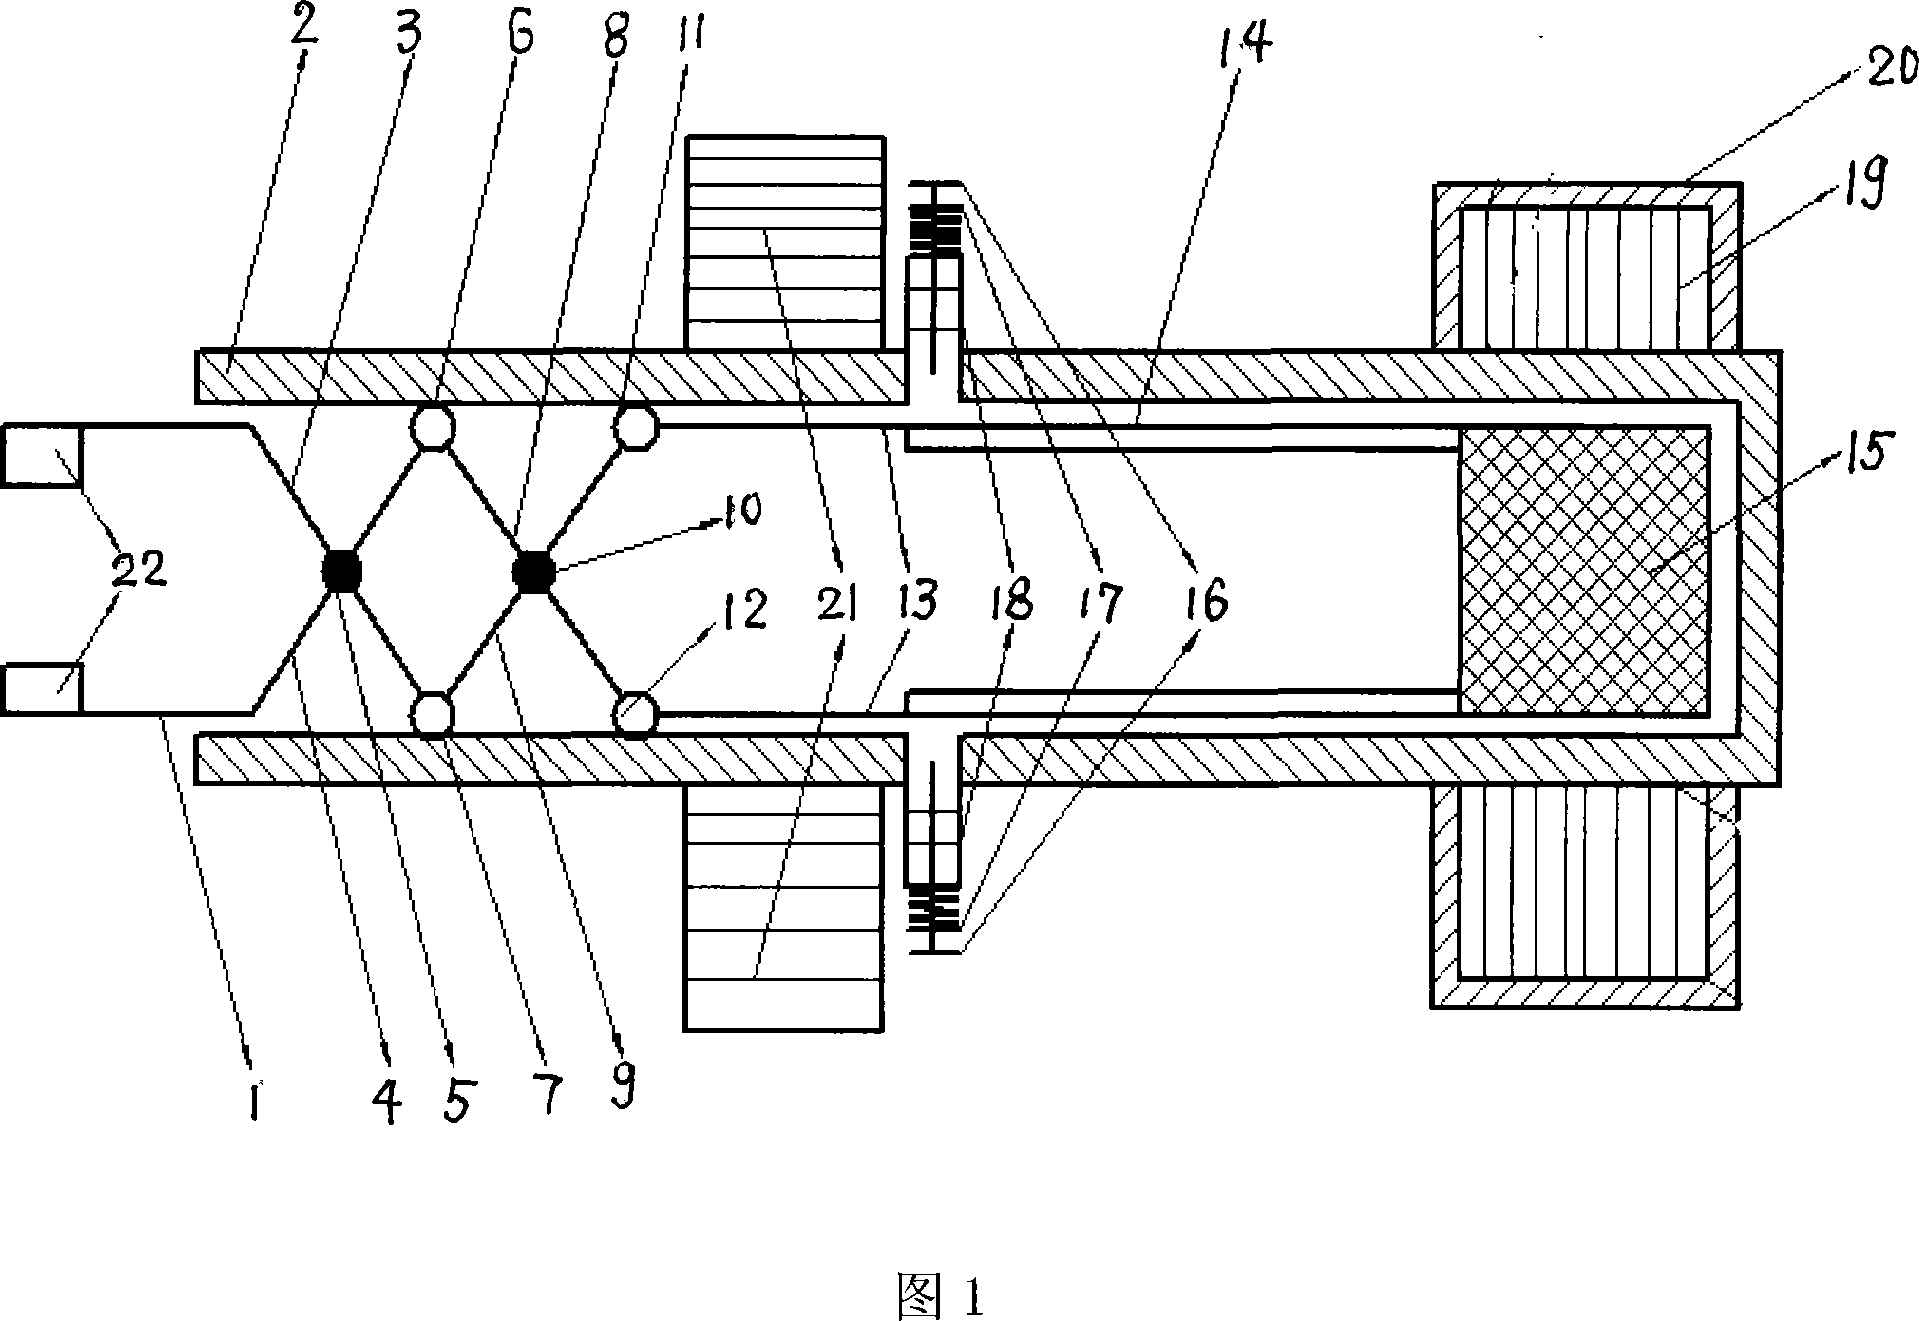 Mechanical hand with conveying and sampling functions